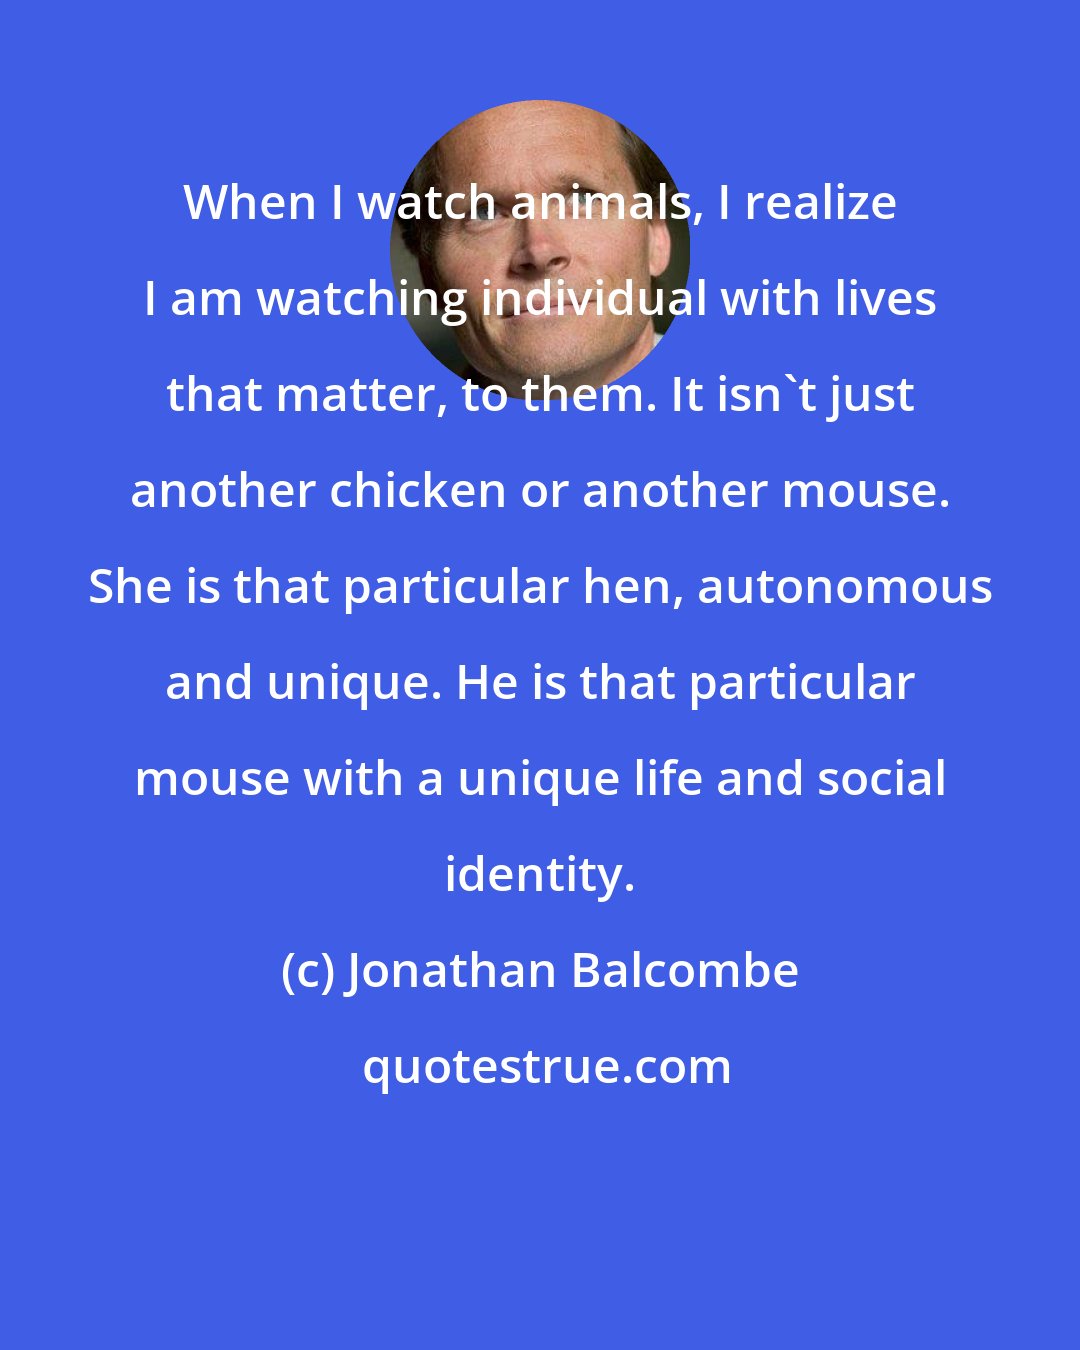 Jonathan Balcombe: When I watch animals, I realize I am watching individual with lives that matter, to them. It isn't just another chicken or another mouse. She is that particular hen, autonomous and unique. He is that particular mouse with a unique life and social identity.